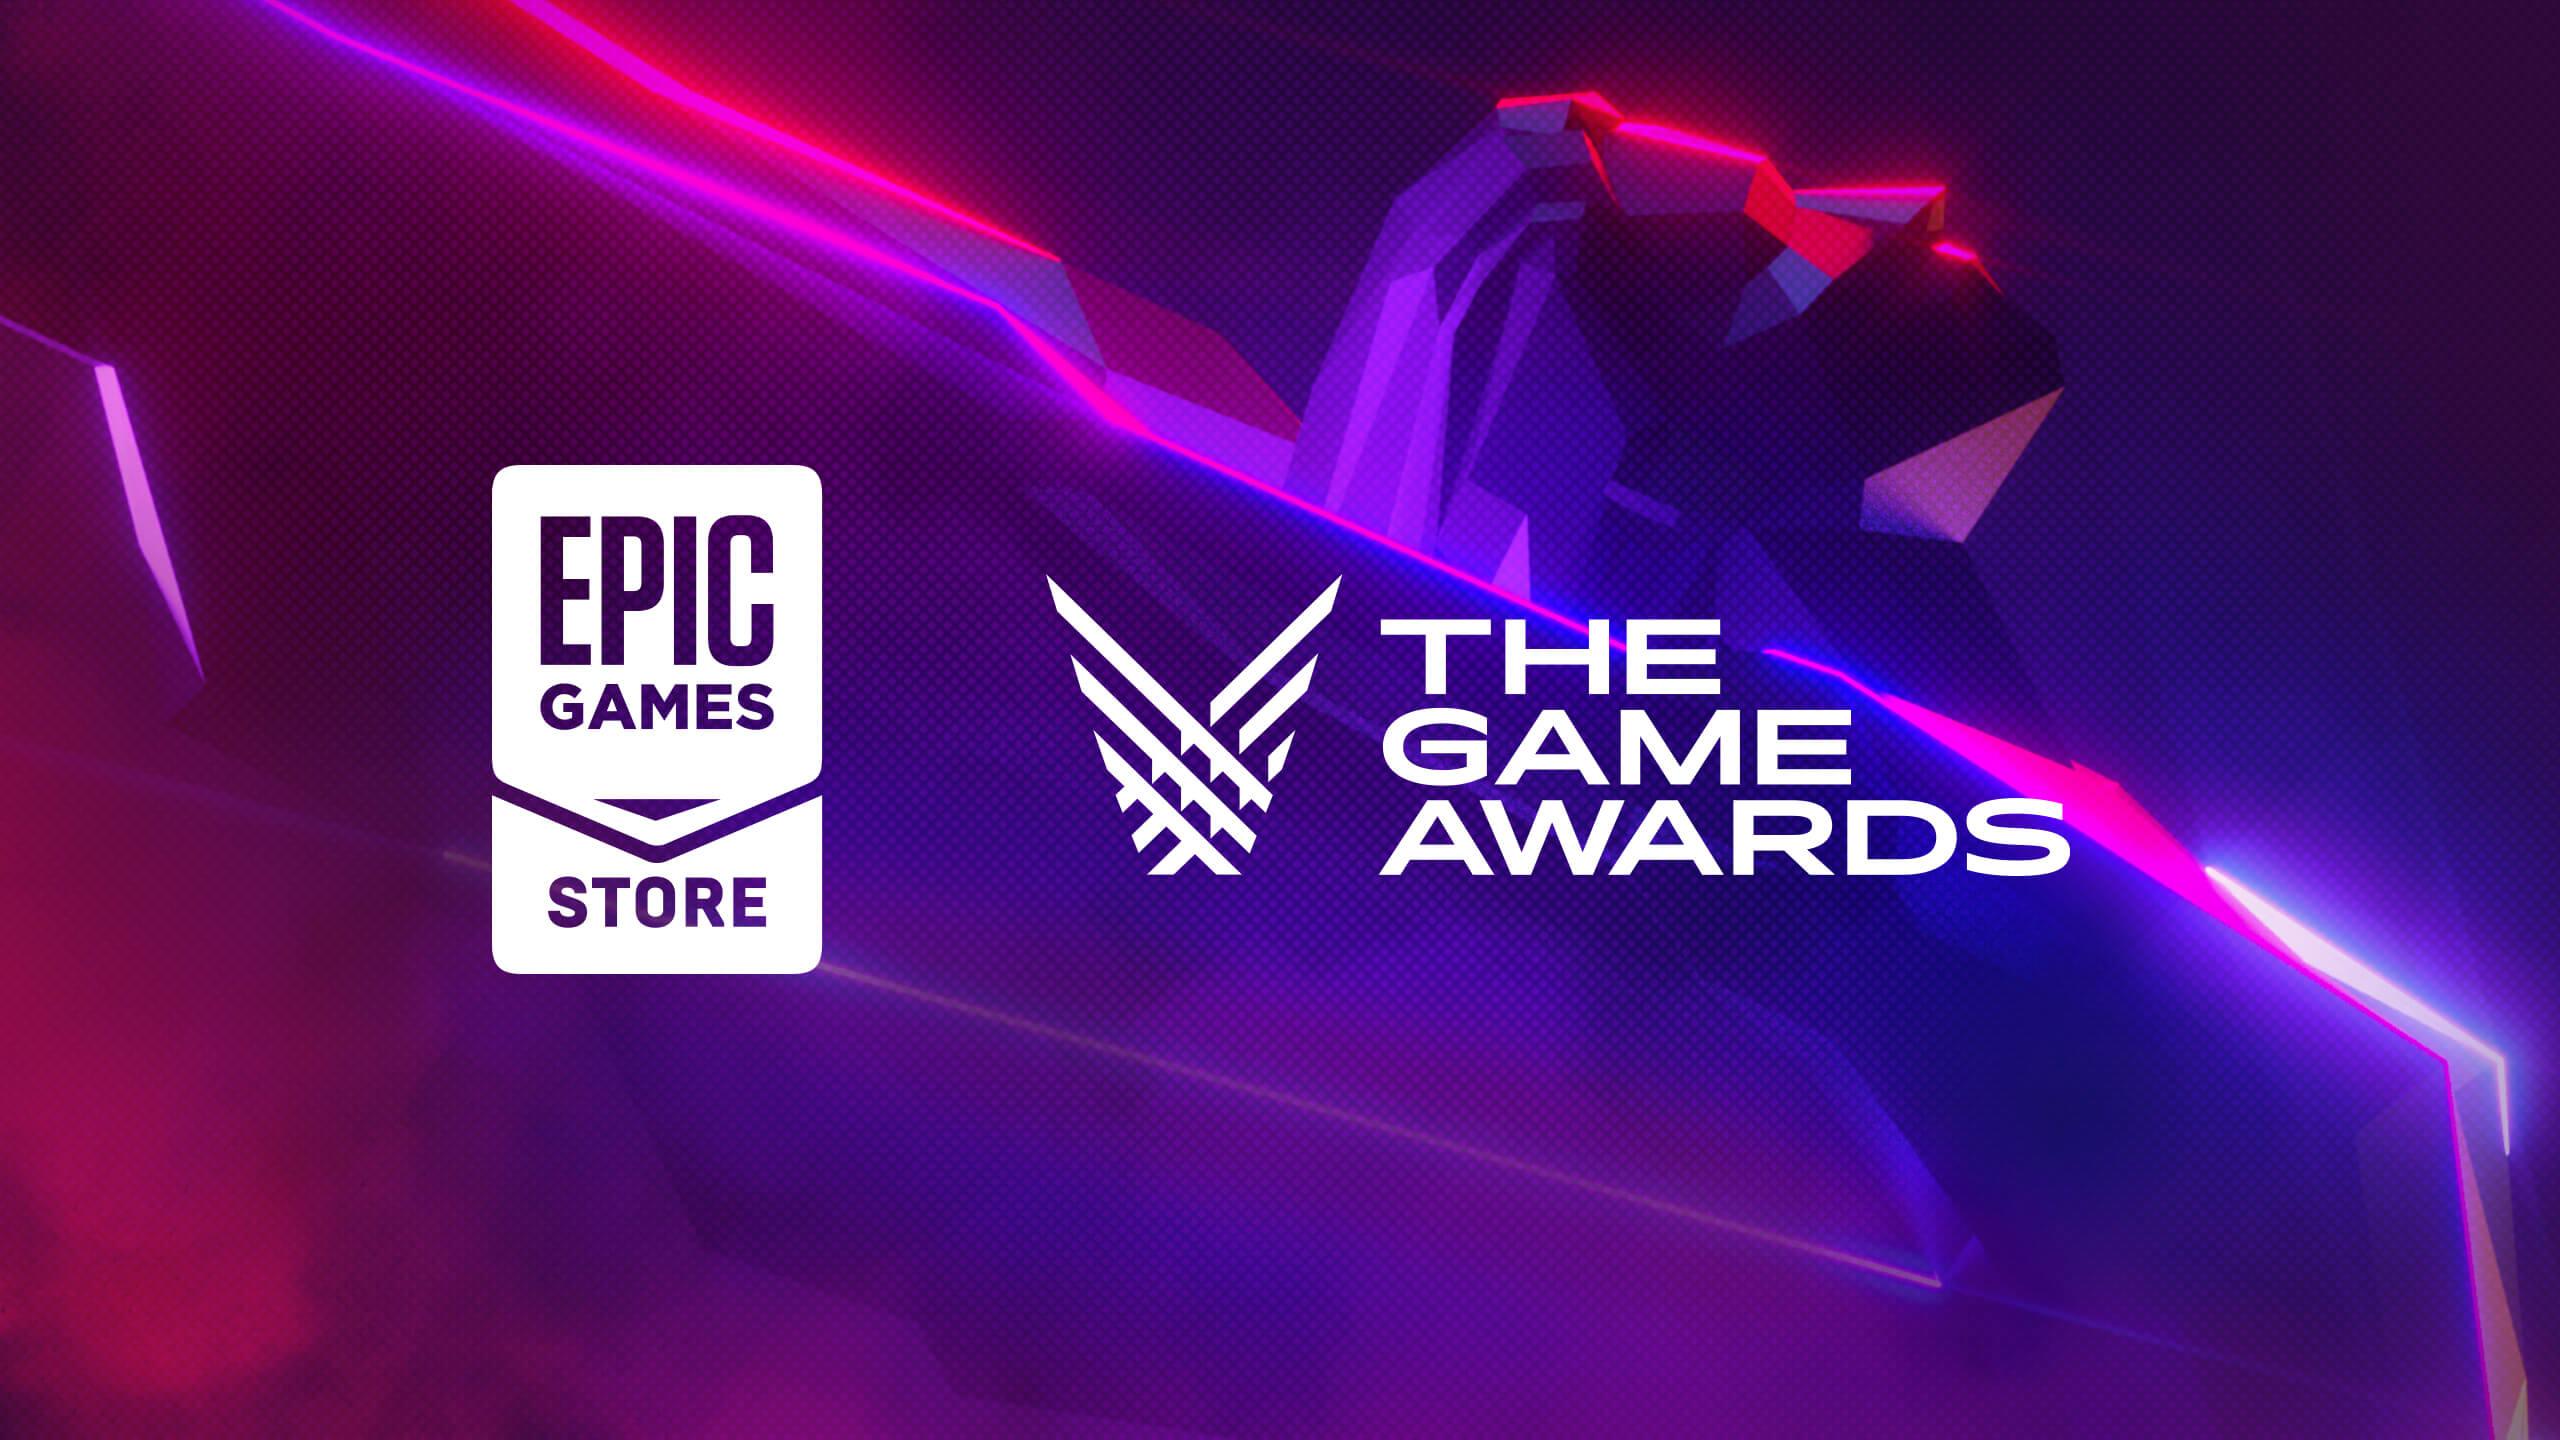 The Epic Games Store at The Game Awards 2019